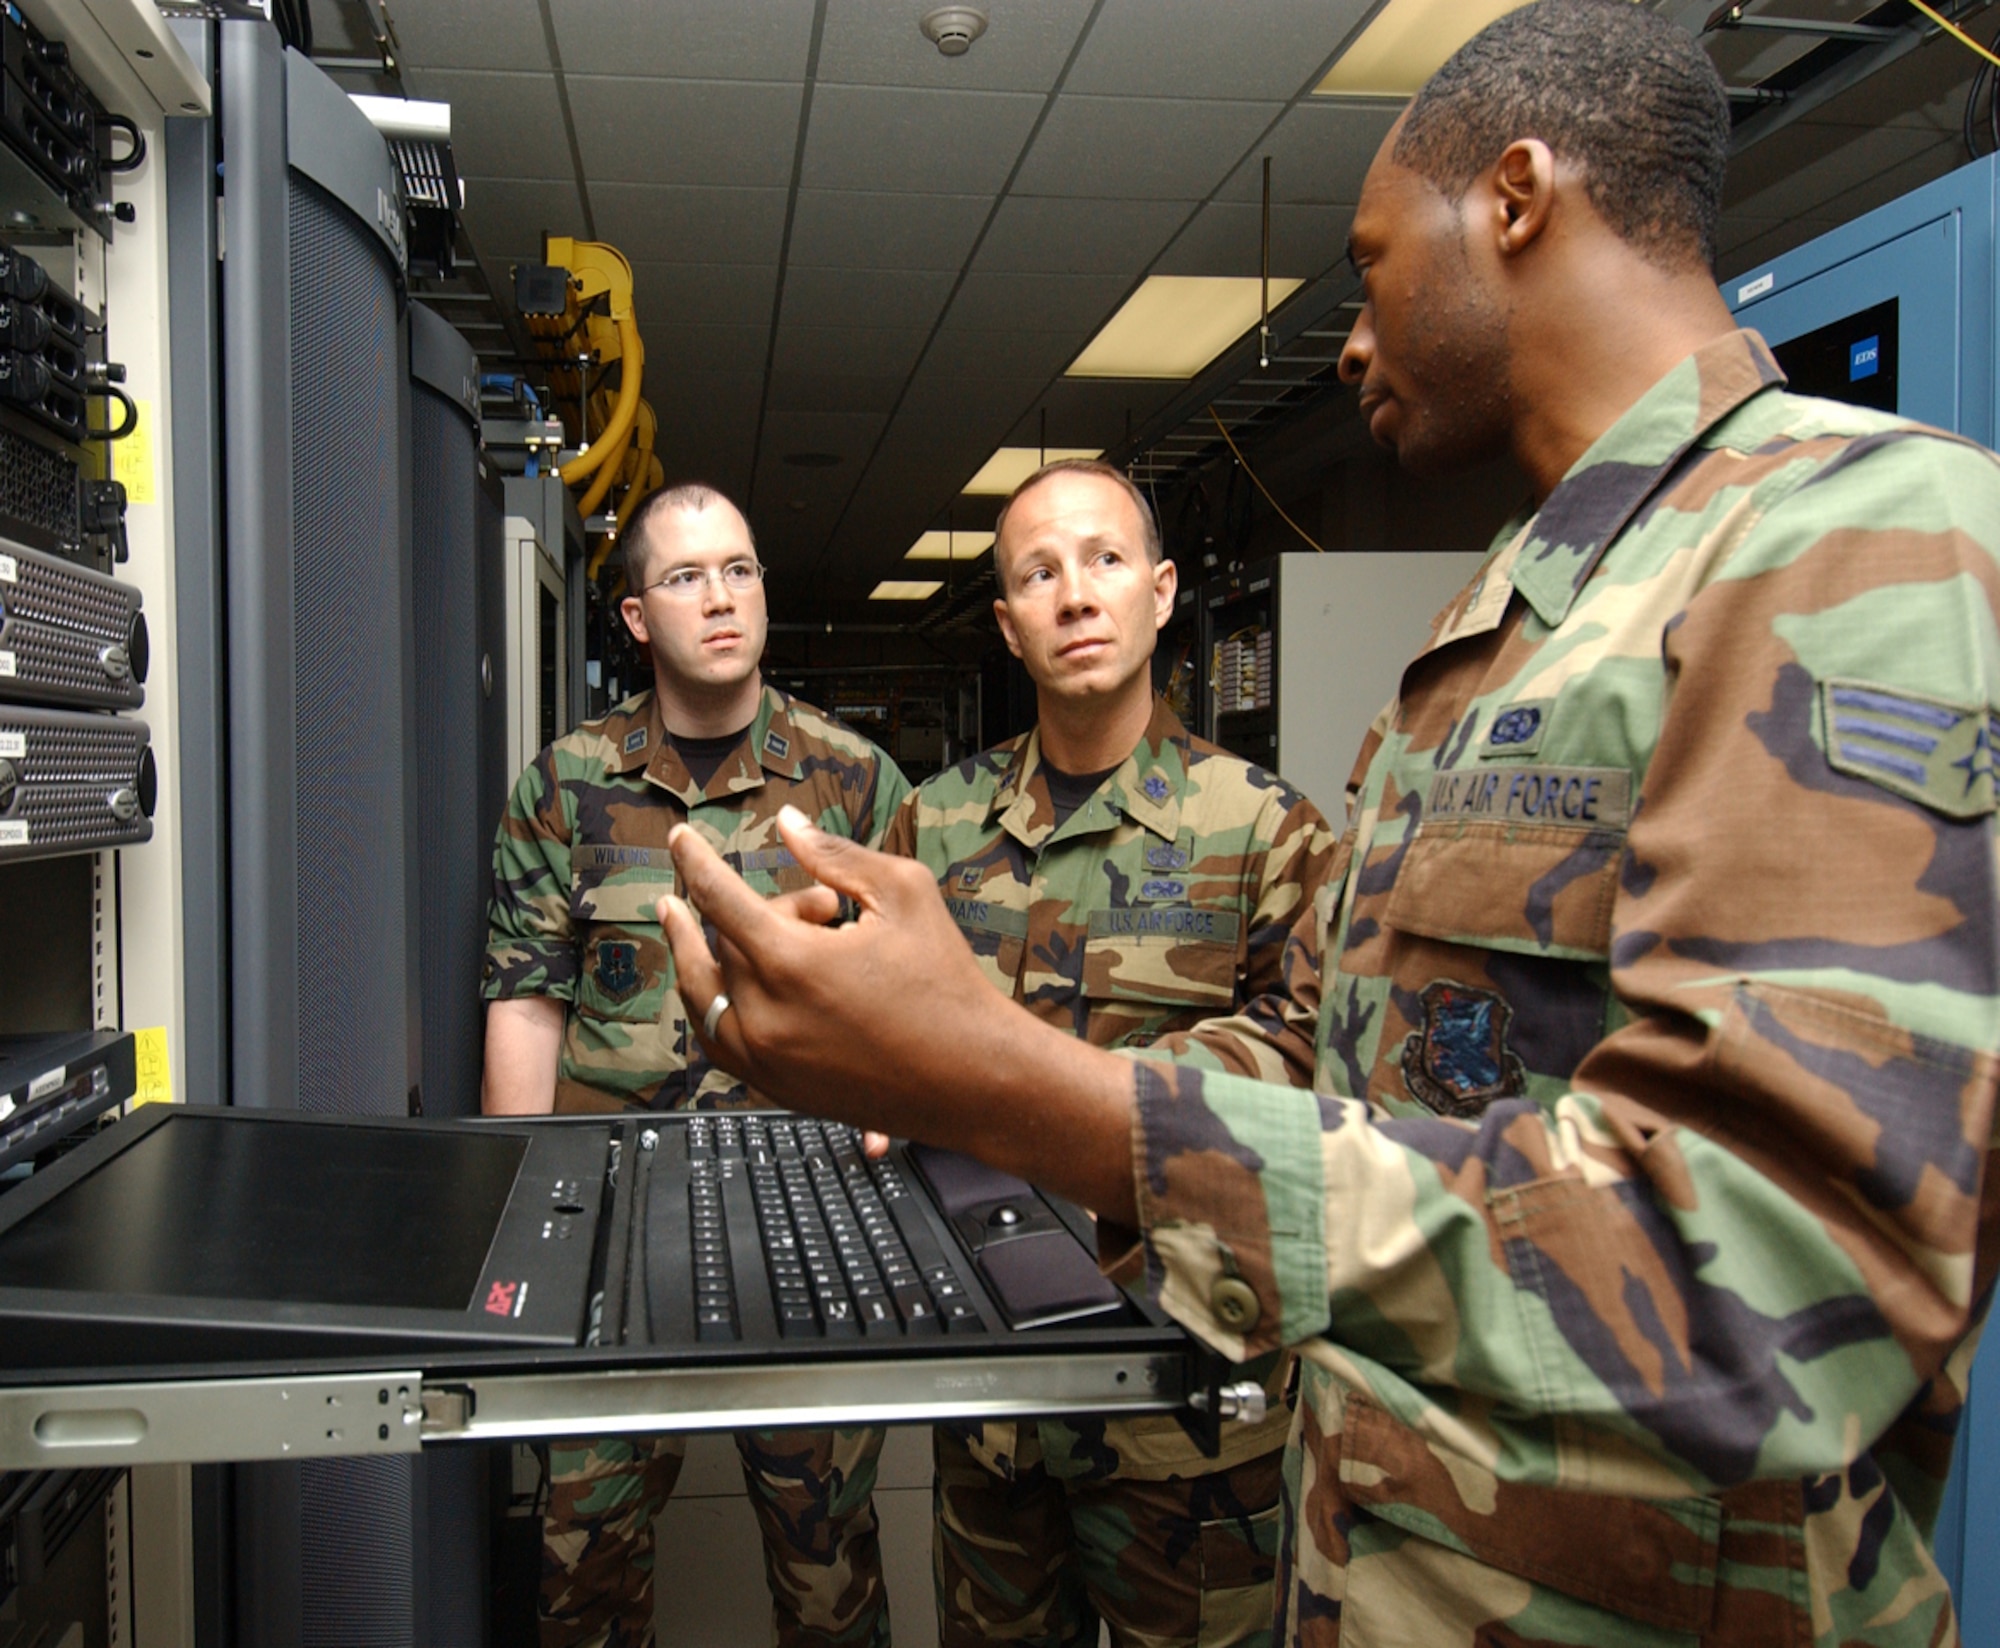 From left, Capt. John Wilkins and  Lt. Col. Ray Adams Jr., new commander of the 81st Communications Squadron, are briefed by Senior Airman Taveres Simpson on the system management server.  Colonel Adams took command July 2.  He comes to Keesler  from Scott Air Force Base, Ill., where he was U.S. Transportation Command’s  test and transformation branch chief in the  command, control, communications and computer systems directorate.   (U.S. Air Force photo by Kemberly Groue)